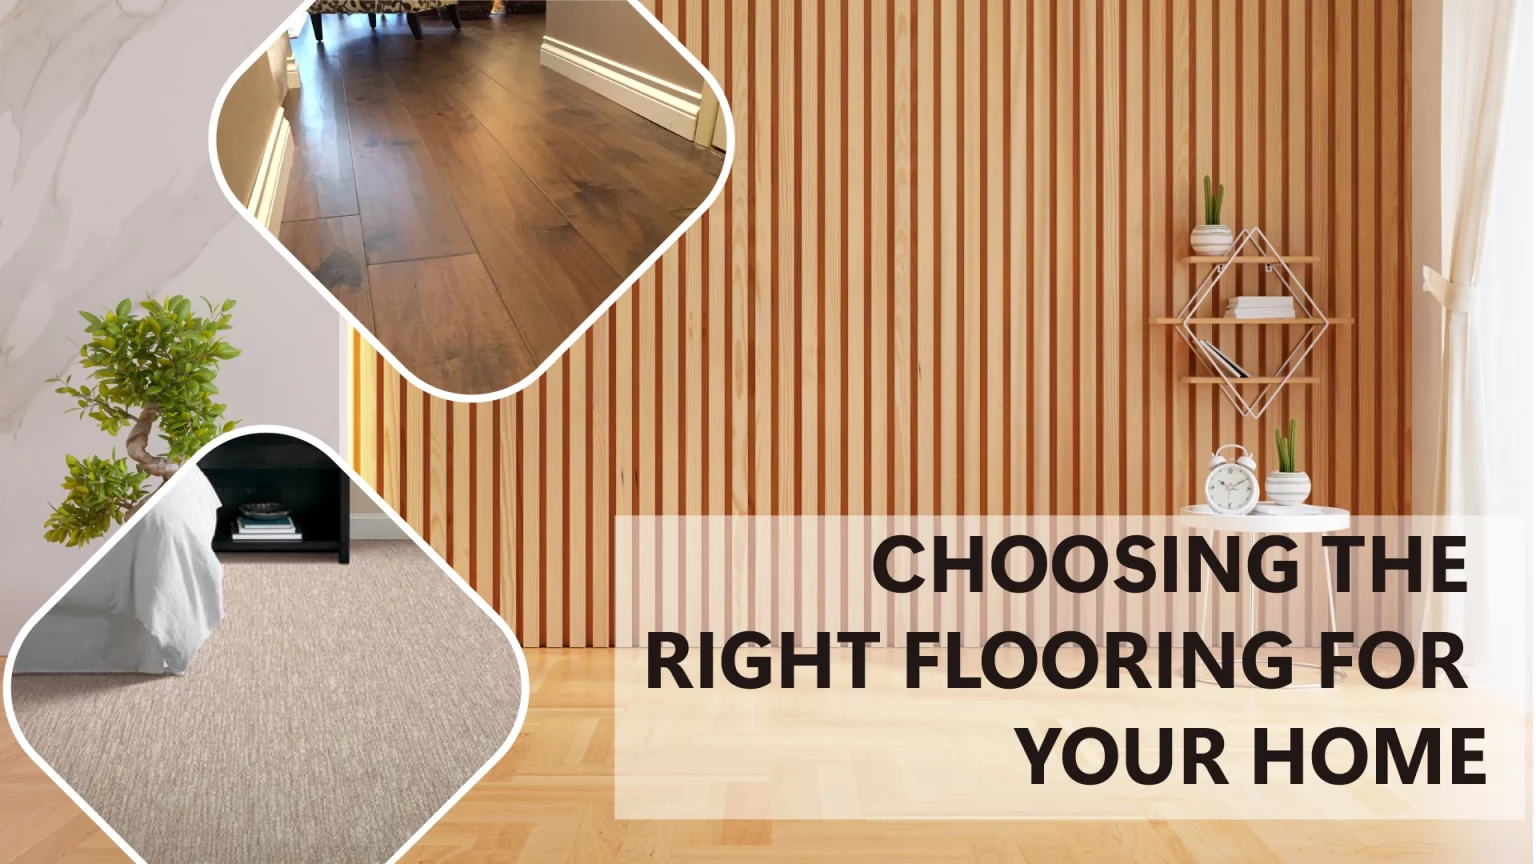 All About Choosing the Best Flooring for Your Home 